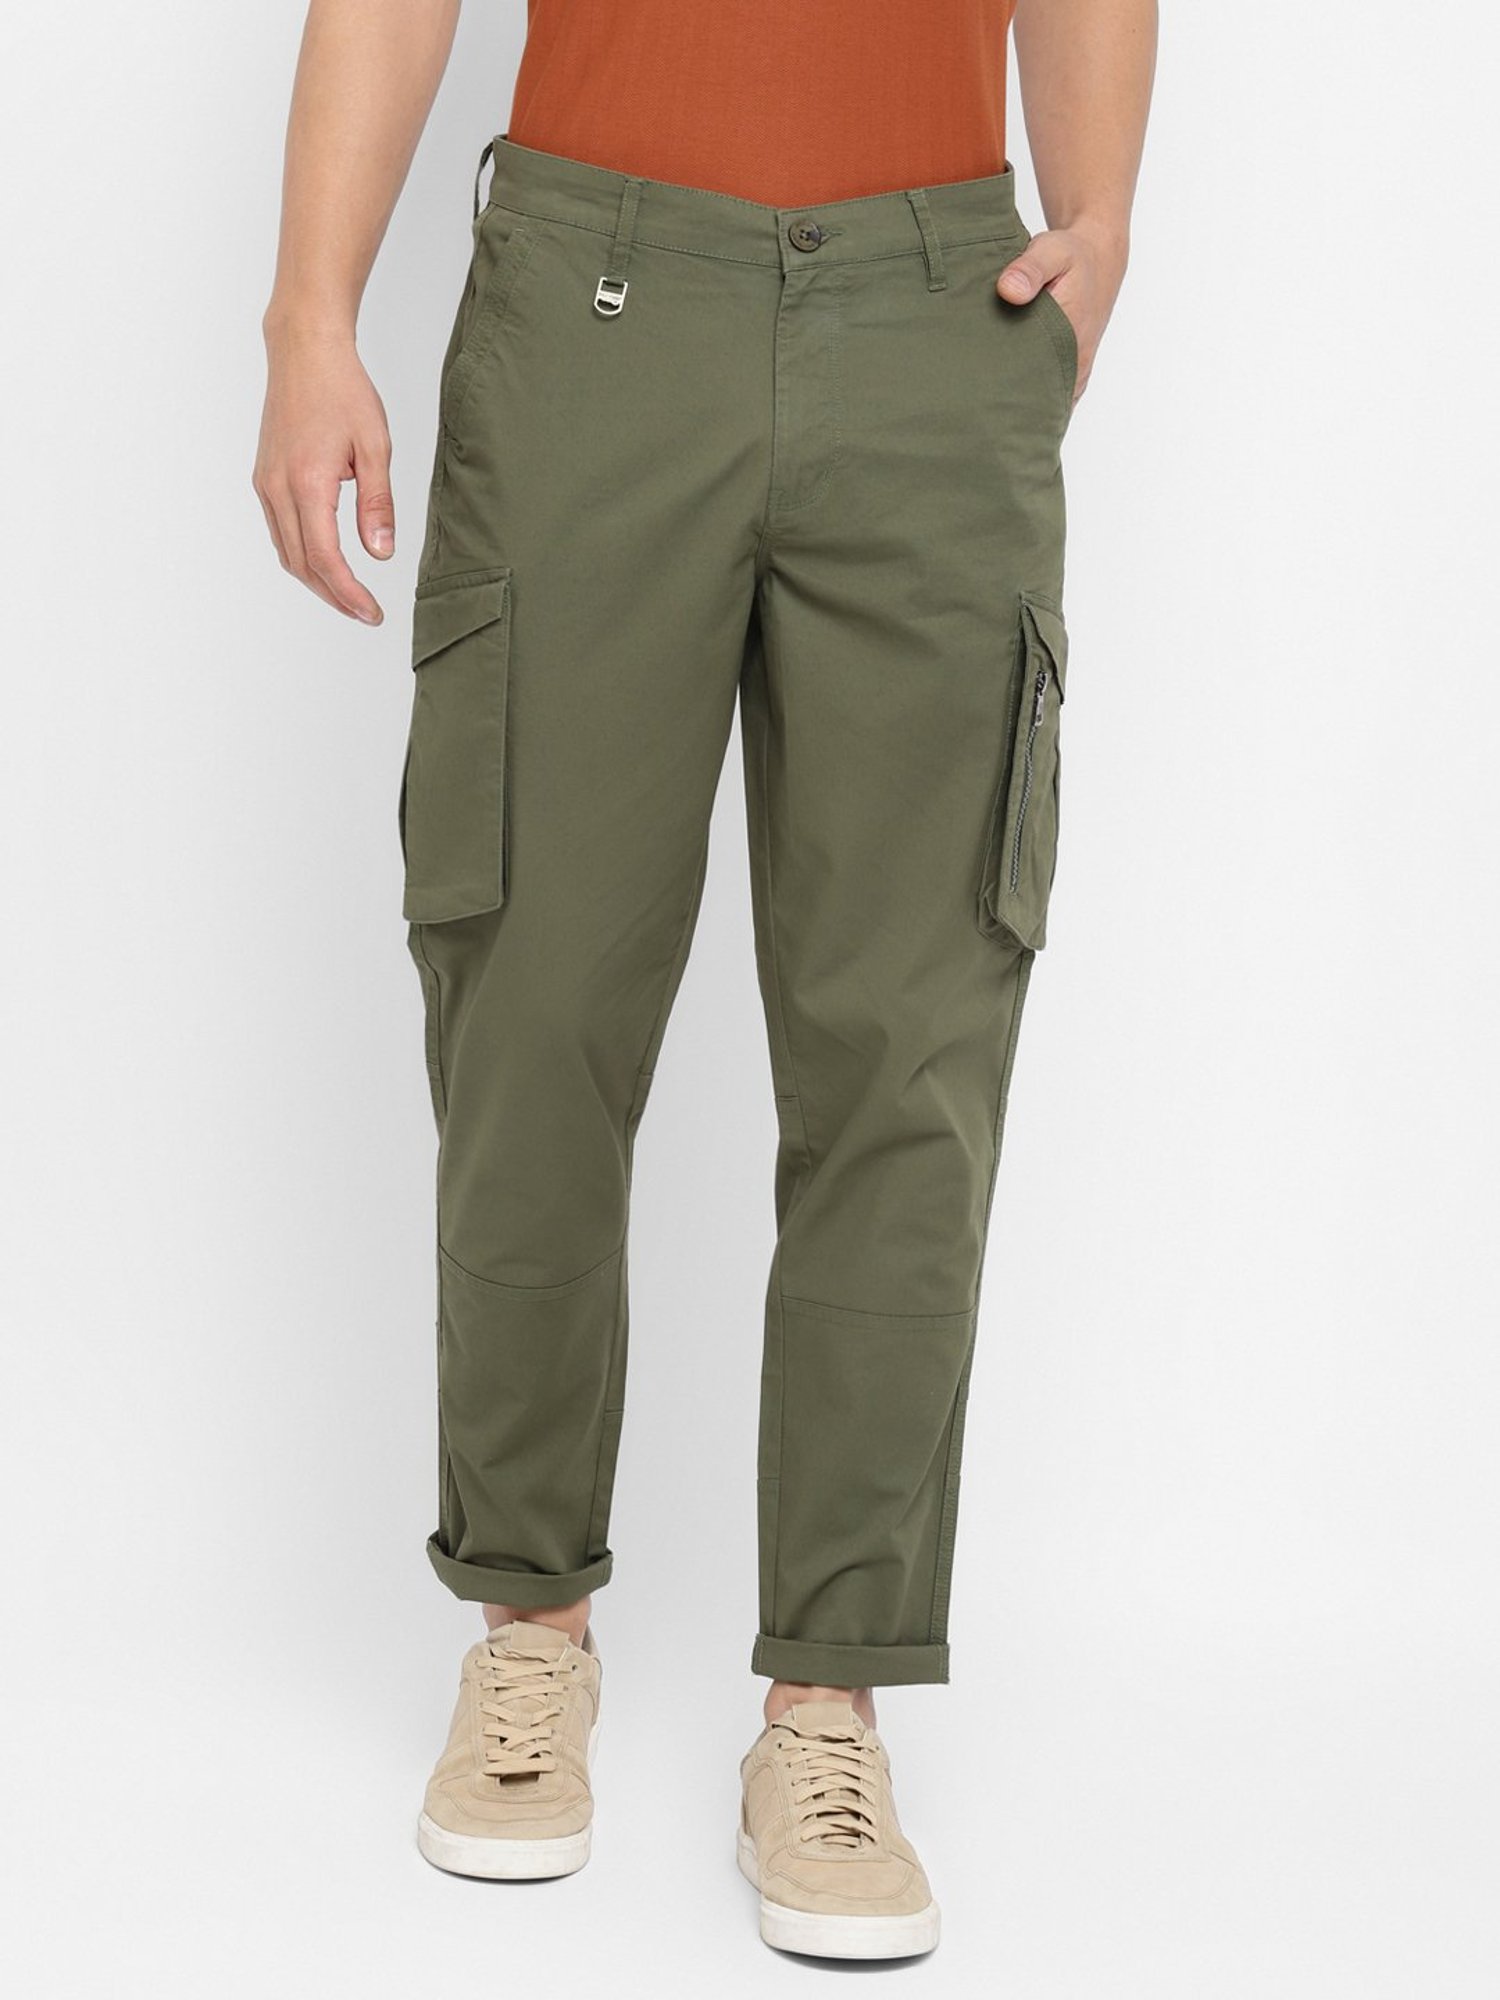 Buy Dark Olive Green Baggy Fit Chinos Cotton Cargo Pants Online At Best  Prices  Tistabene